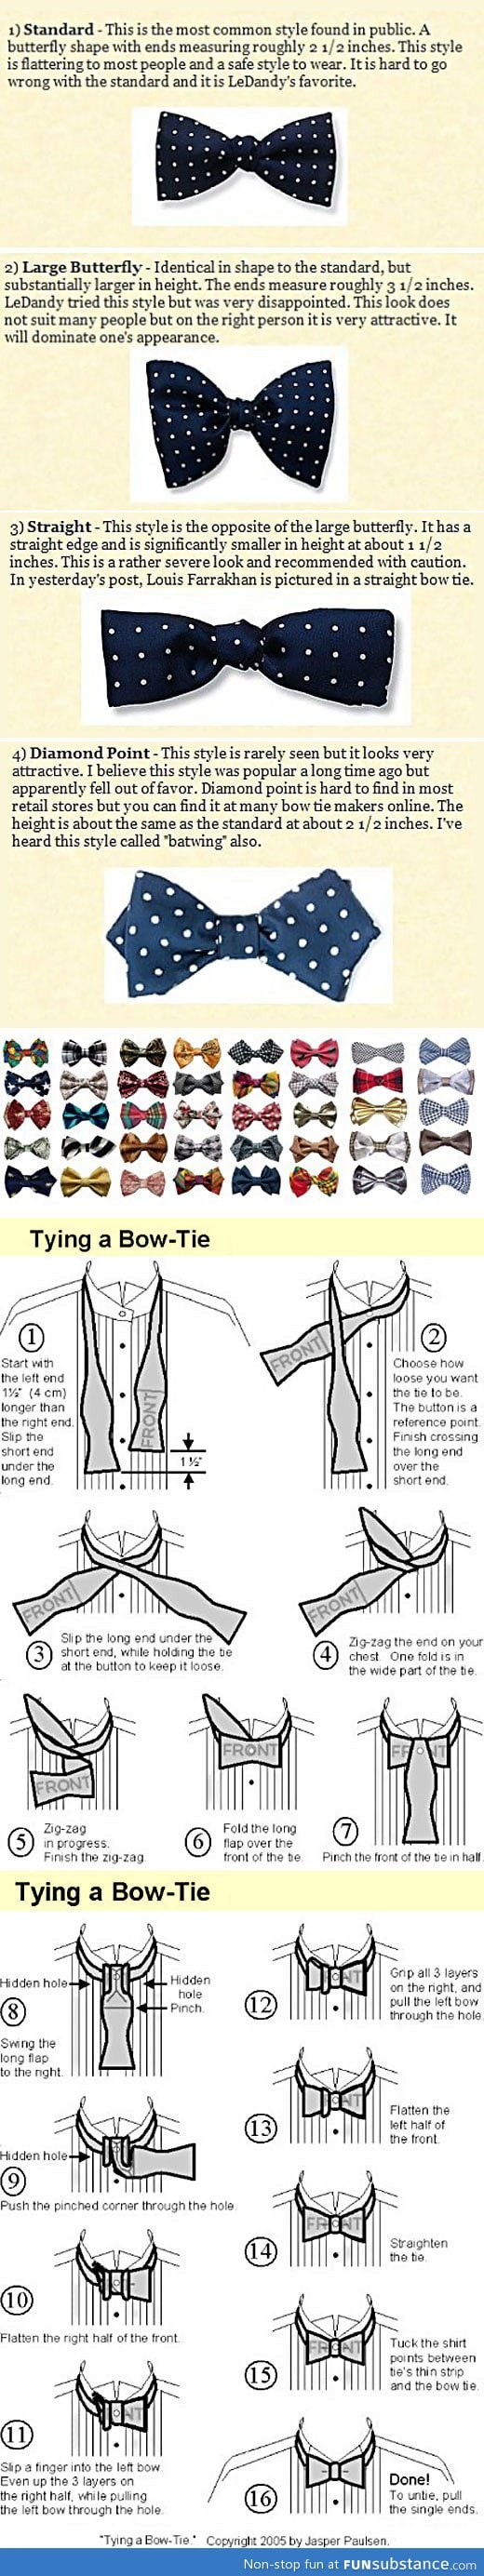 Bow ties are pretty cool